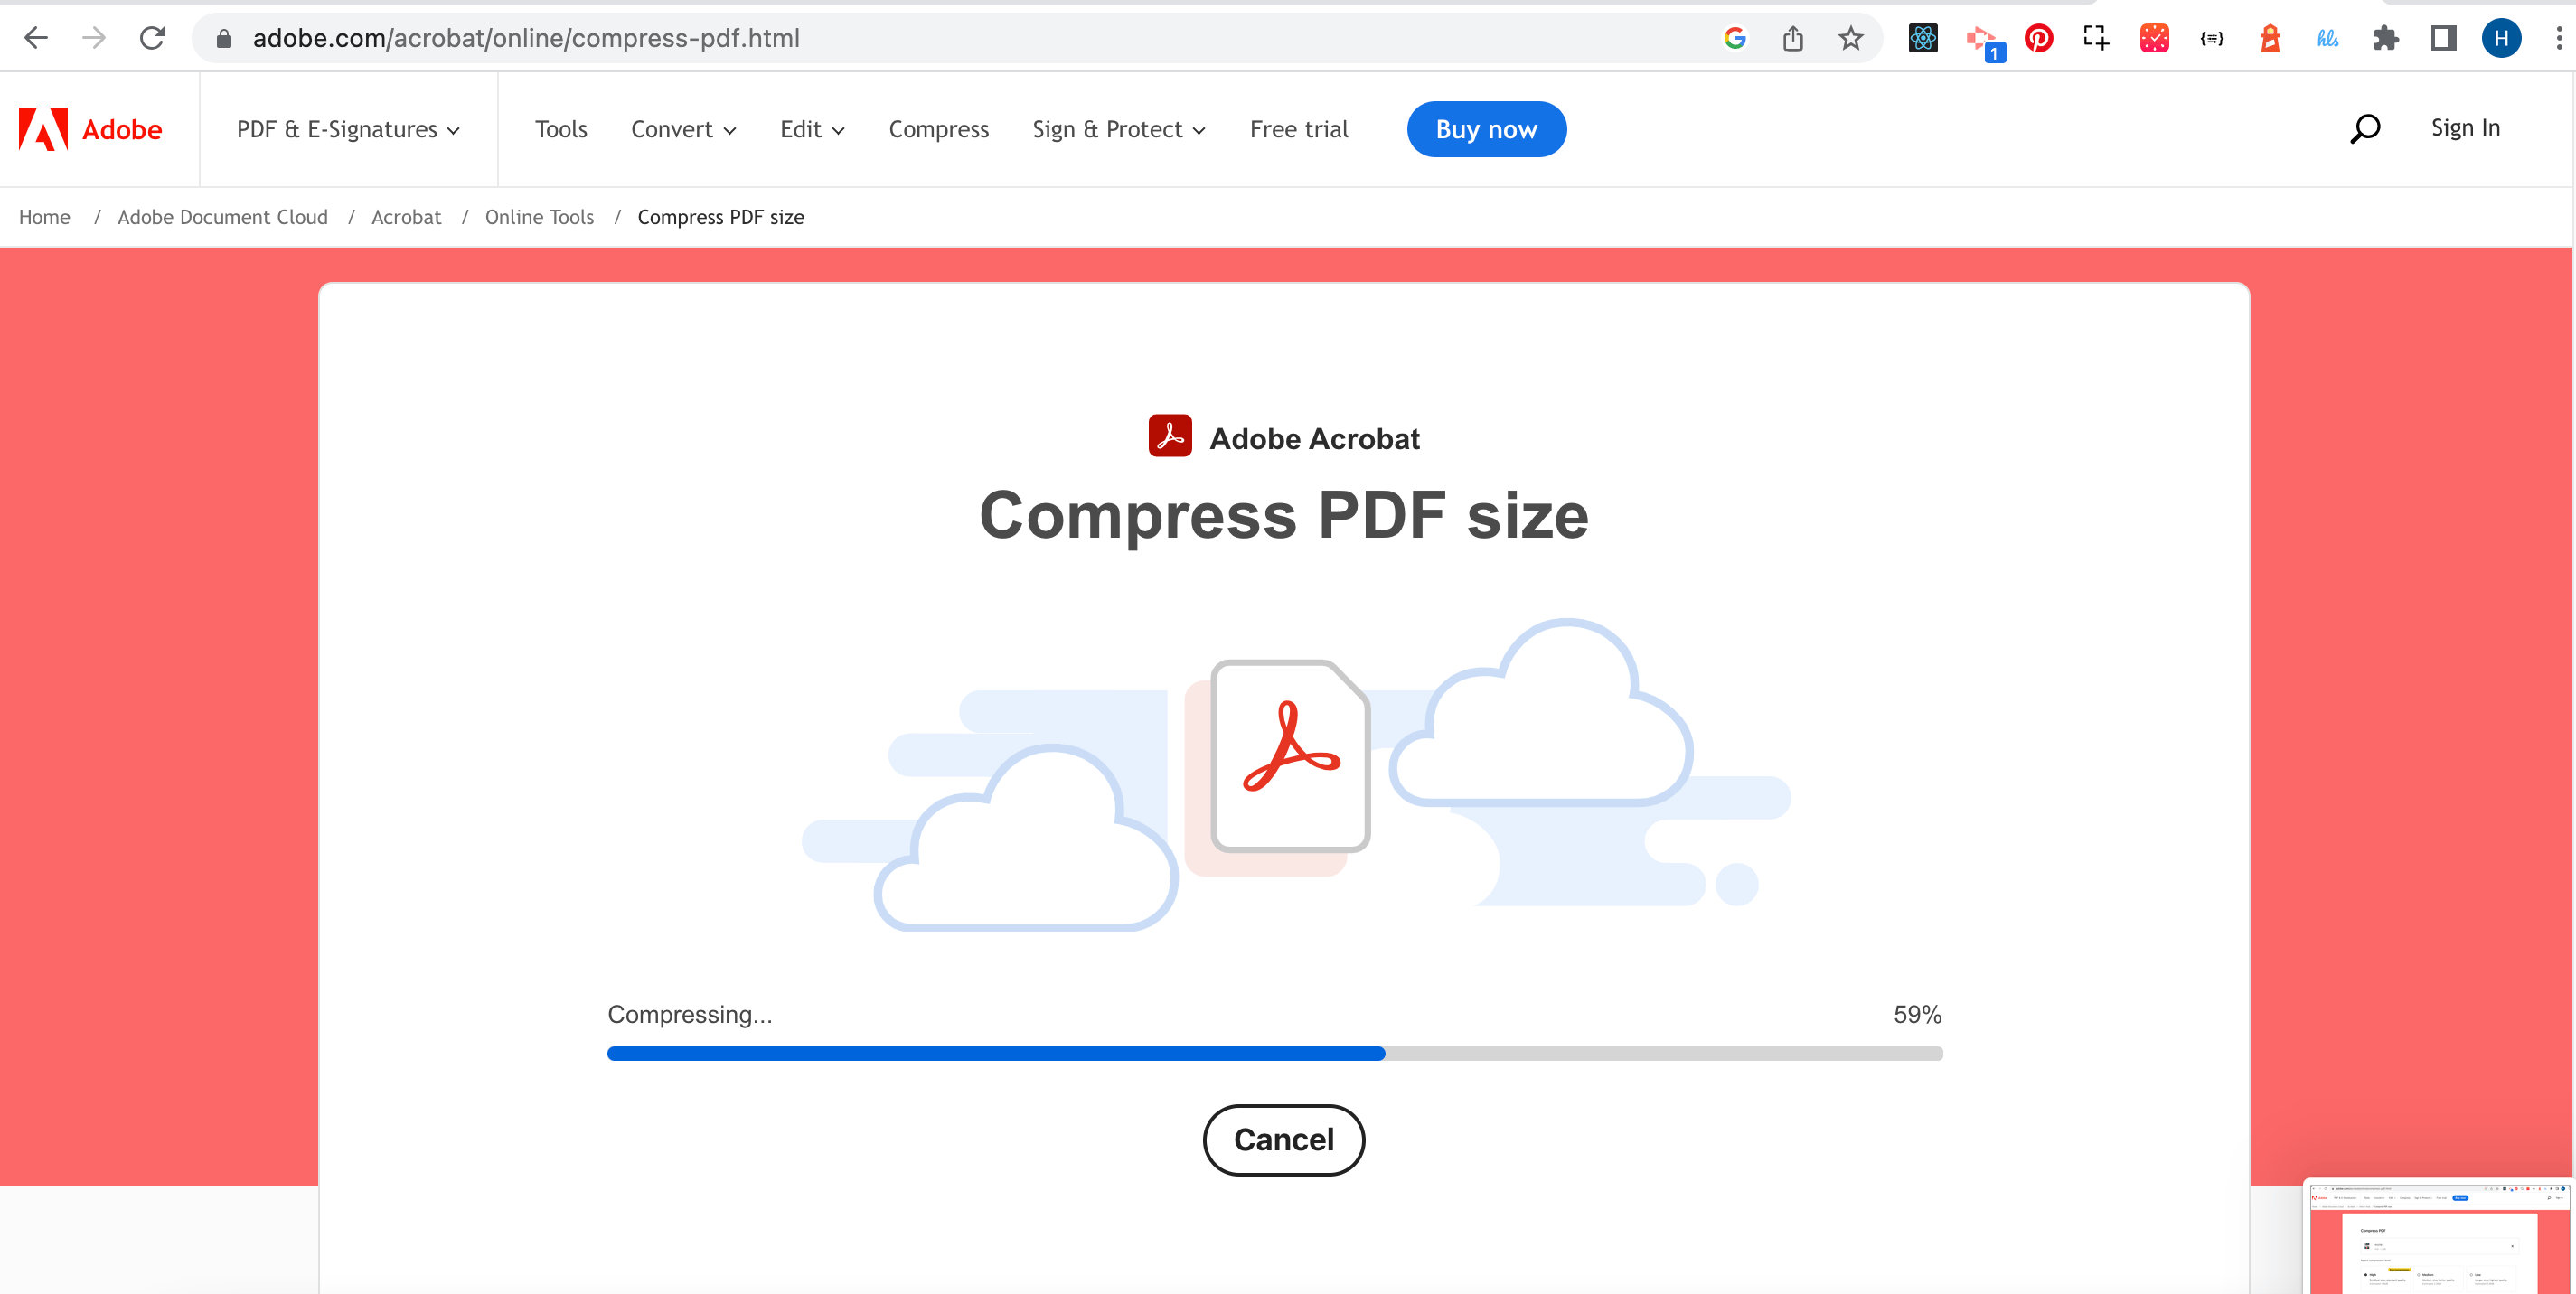 How To Use Online PDF Compressors: Step 4